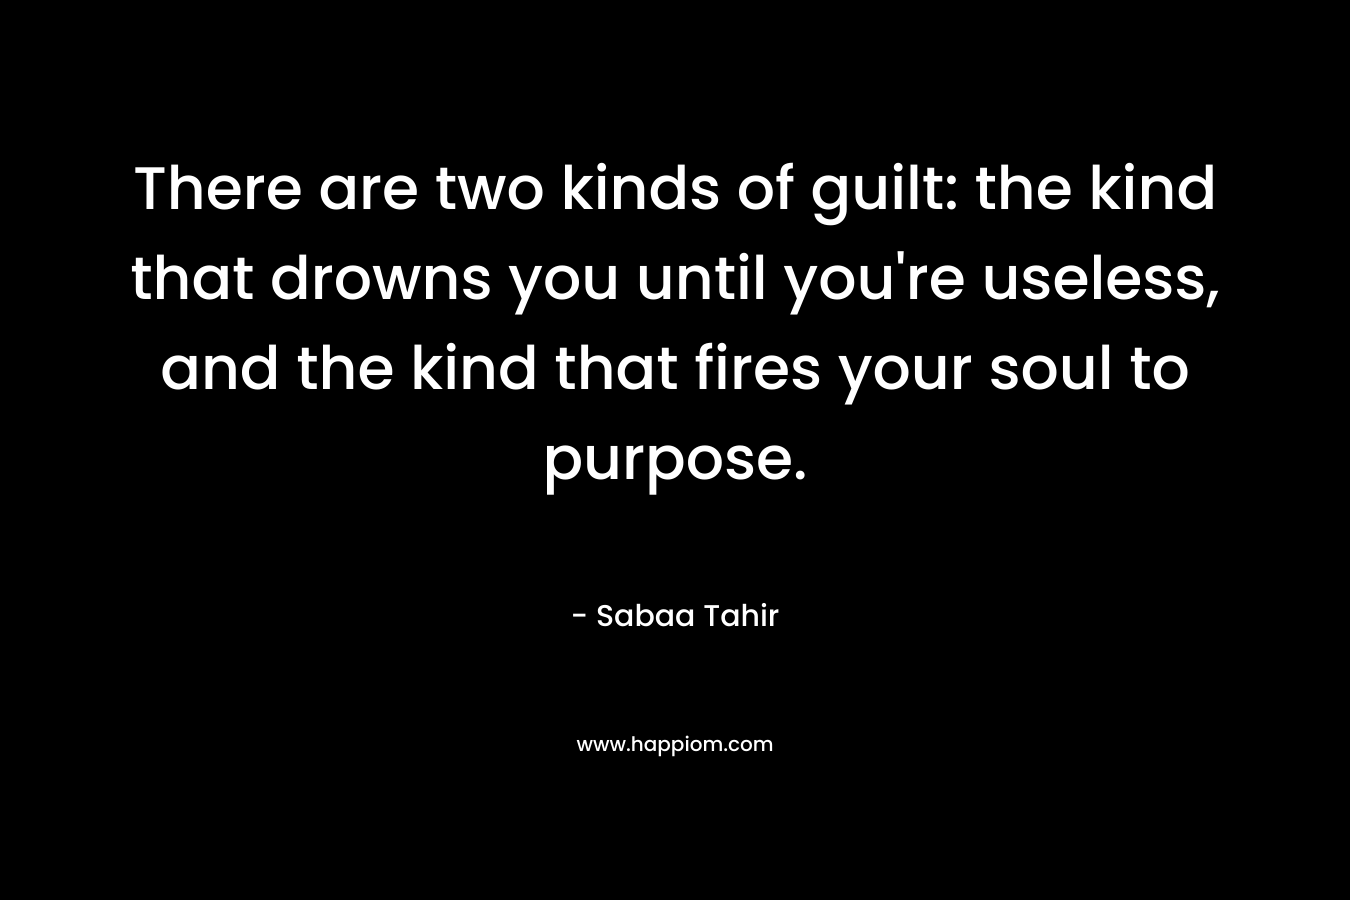 There are two kinds of guilt: the kind that drowns you until you’re useless, and the kind that fires your soul to purpose. – Sabaa Tahir